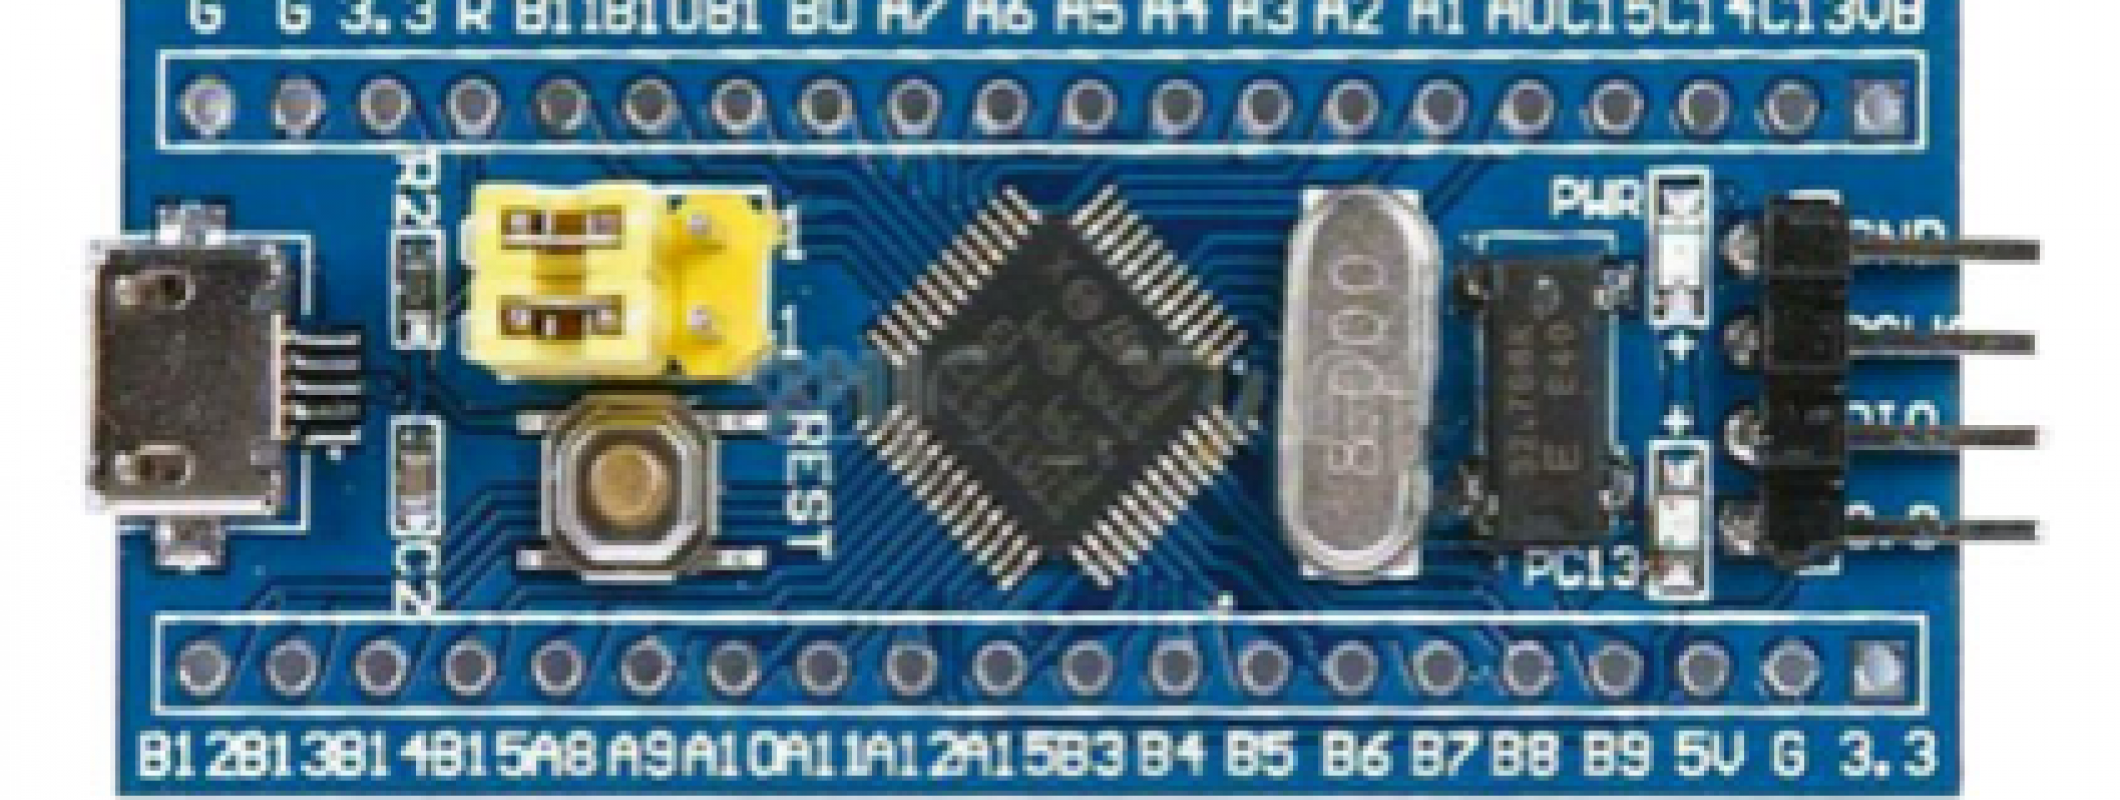 Introduction To Programming Stm 32 Blue Pill Development